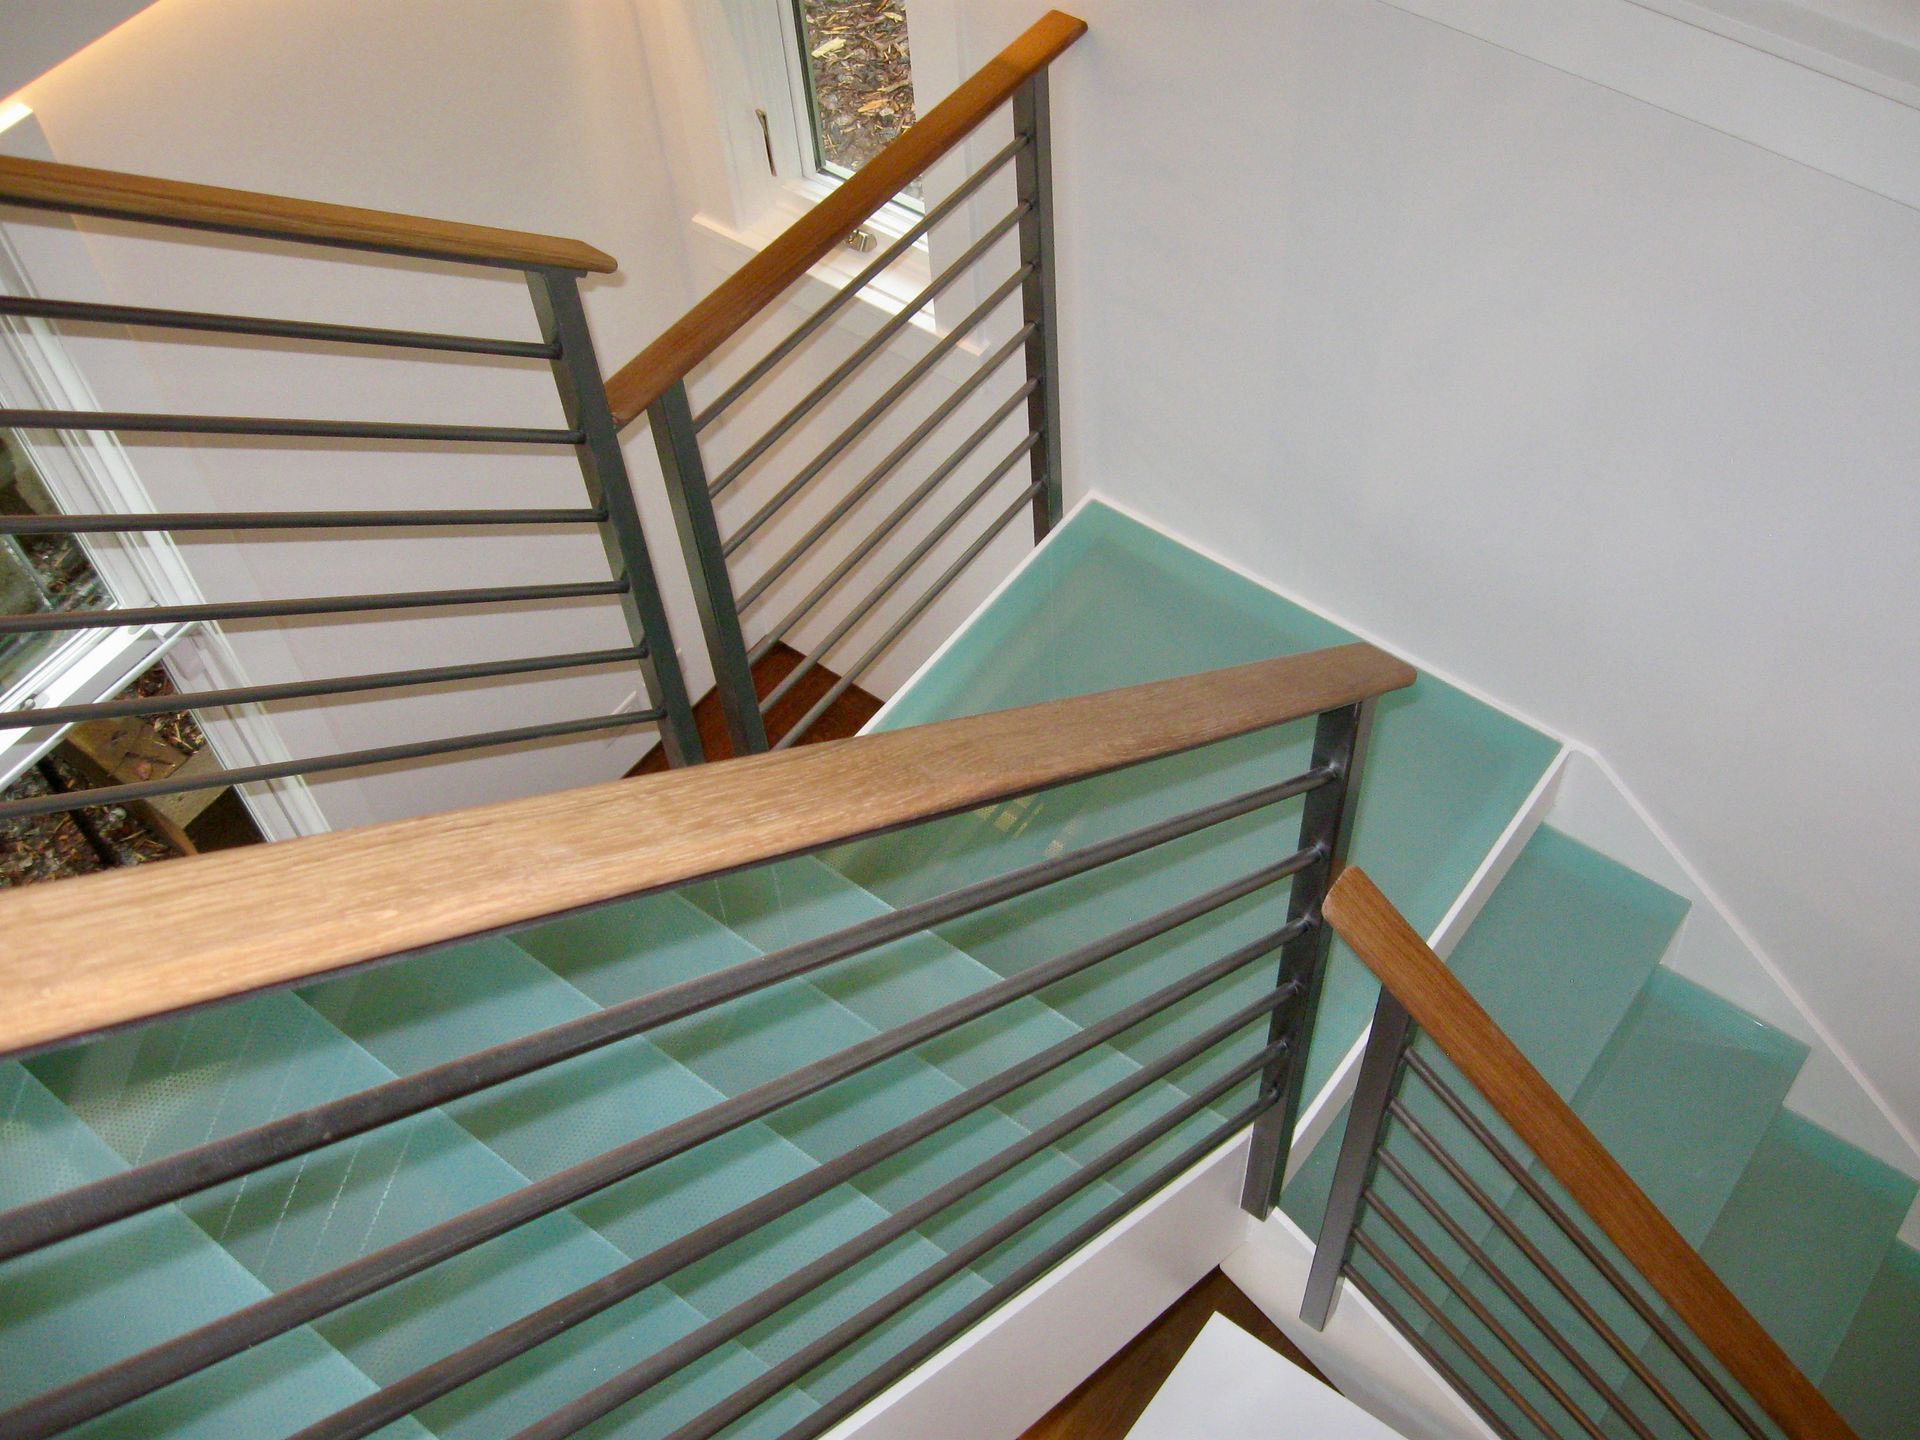 A picture of a glass staircase taken from the top of the stairs looking down the glass treads.